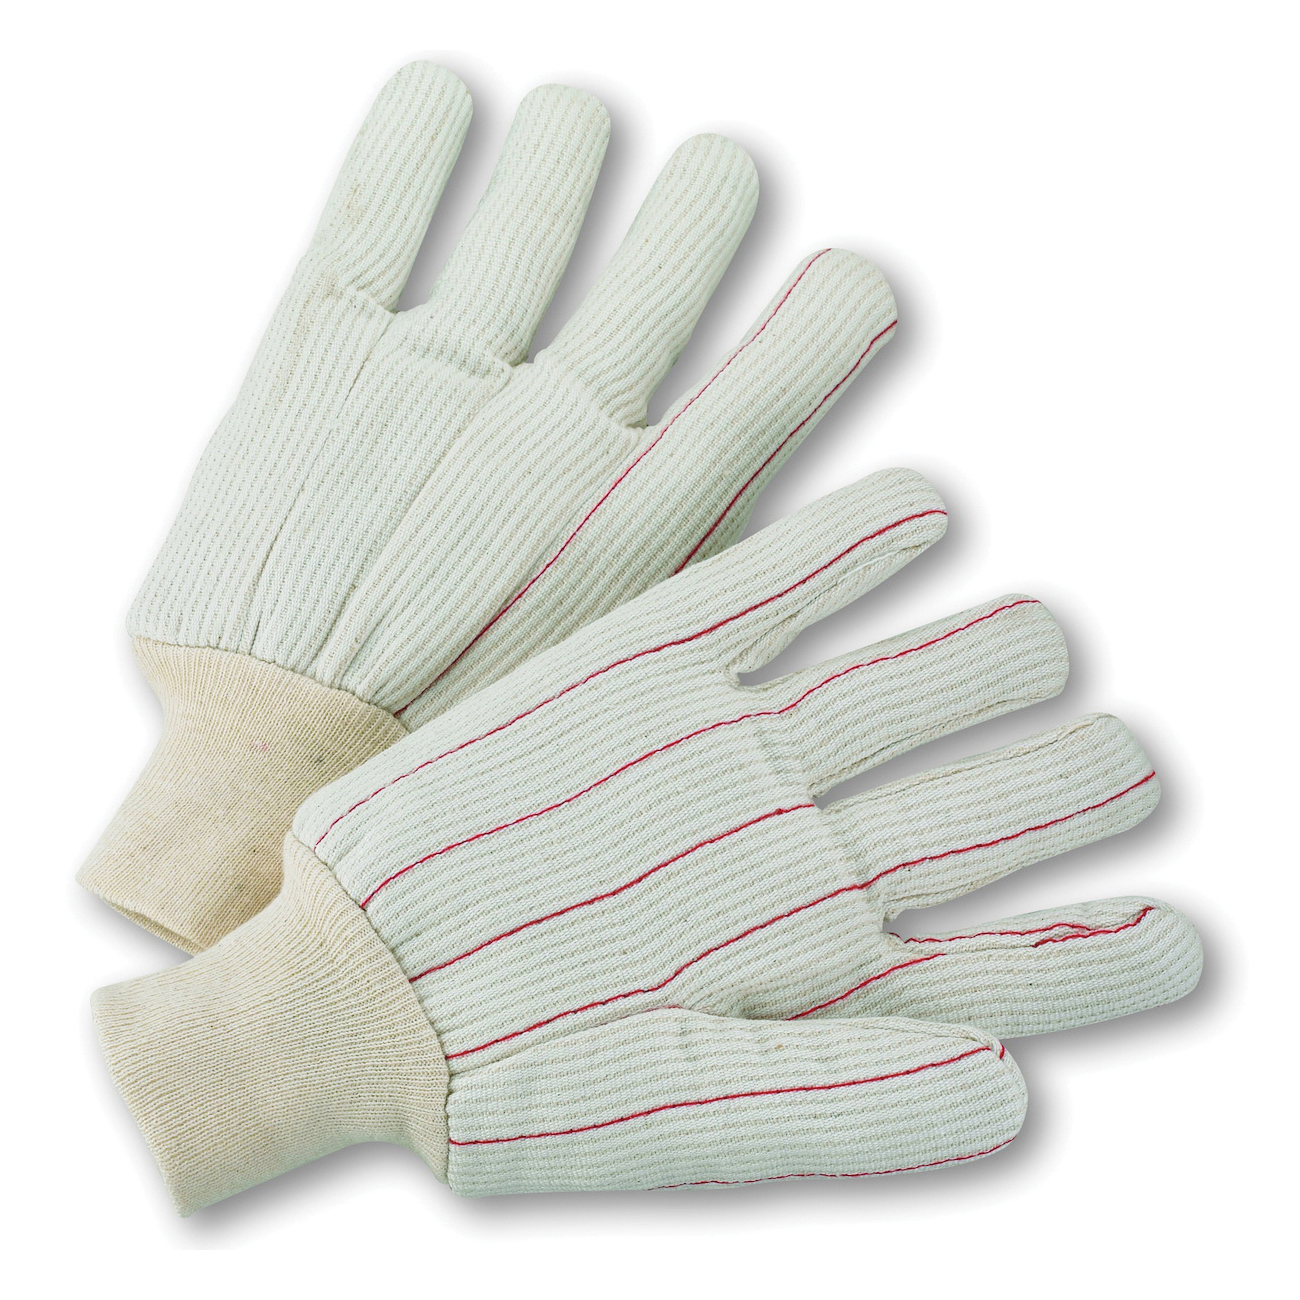 PIP® K81SCNCI Unisex General Purpose Gloves, Work, Clute Cut/Full Finger/Straight Thumb Style, L, Cotton Palm, Cotton, White, Knit Wrist Cuff, Resists: Oil and Dirt, Polyester Lining